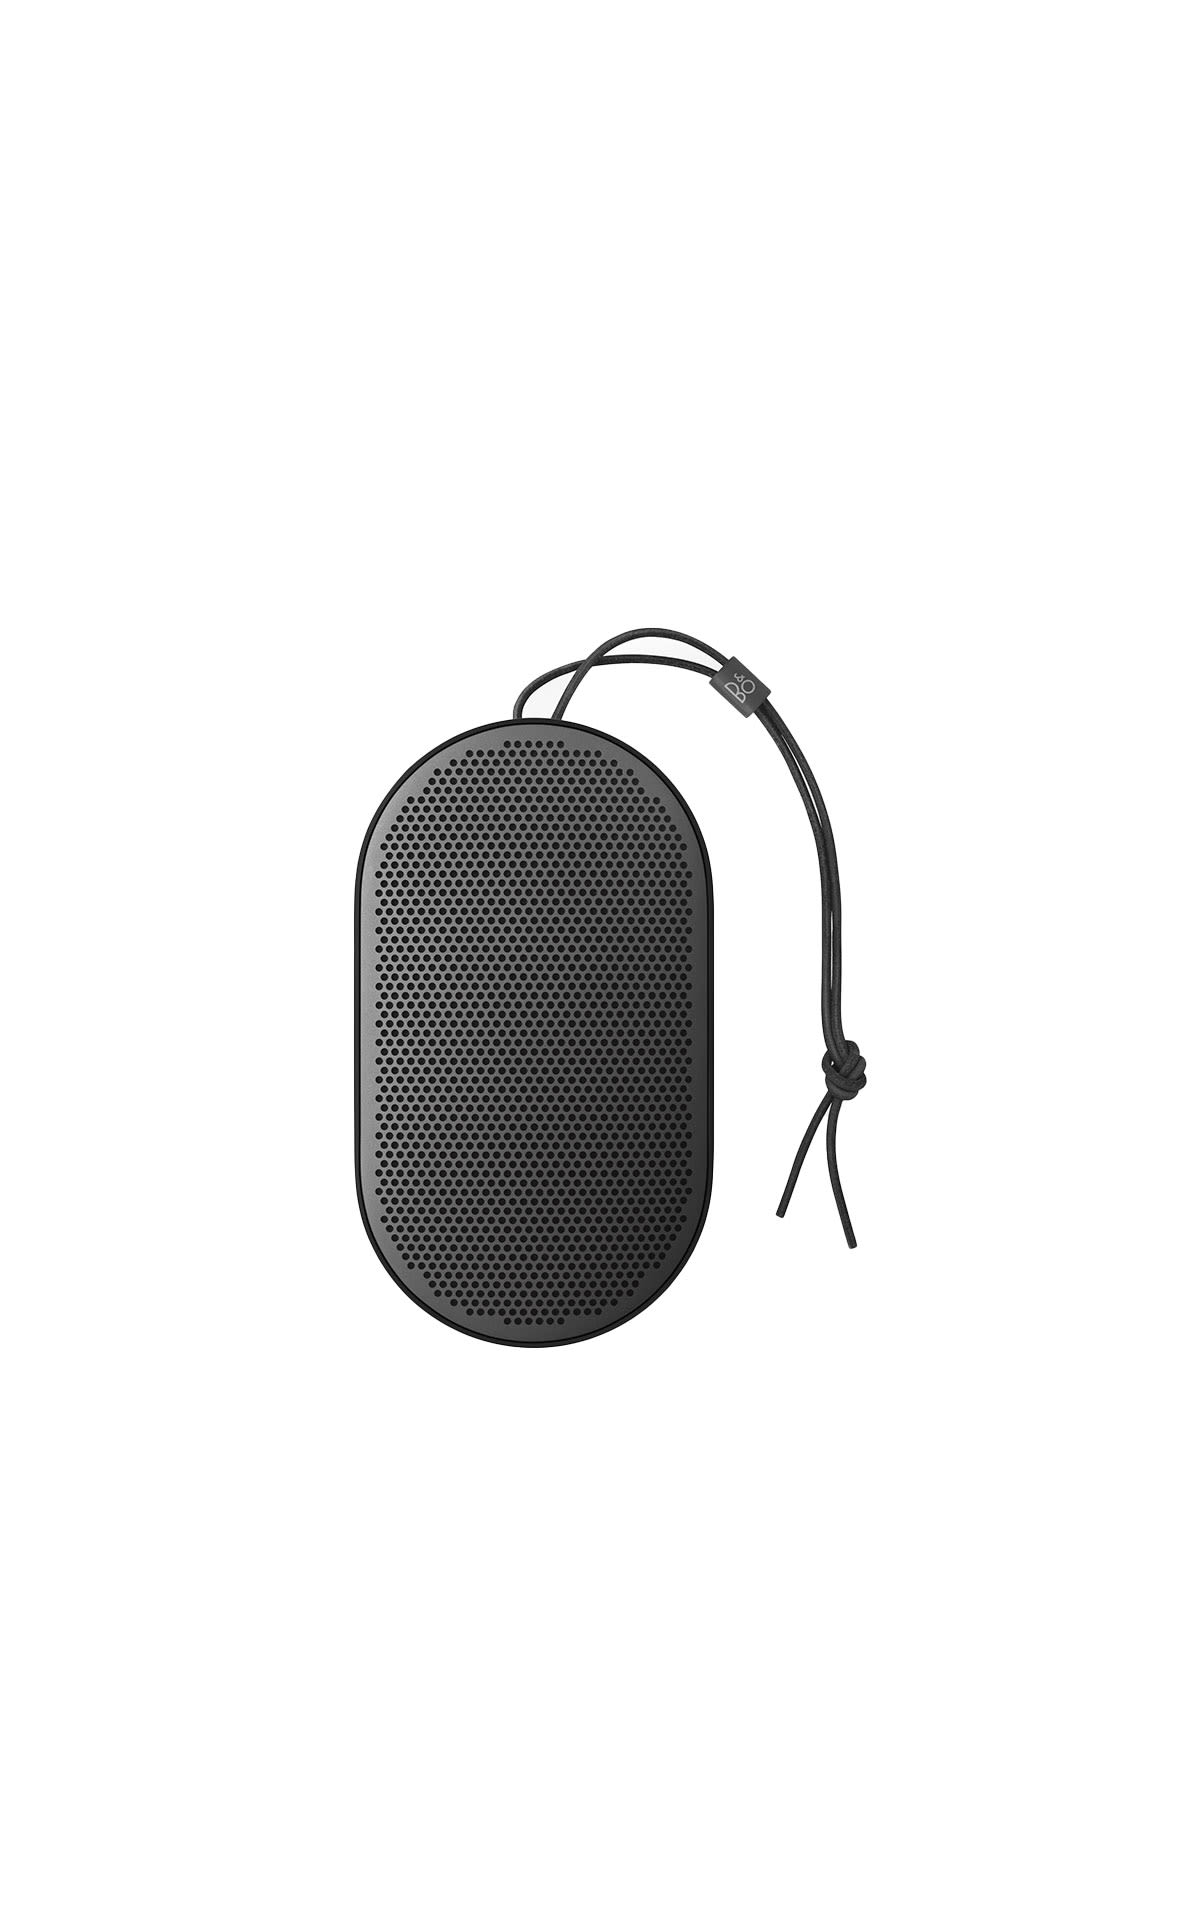 Bang & Olufsen BeoPlay P2 black from Bicester Village